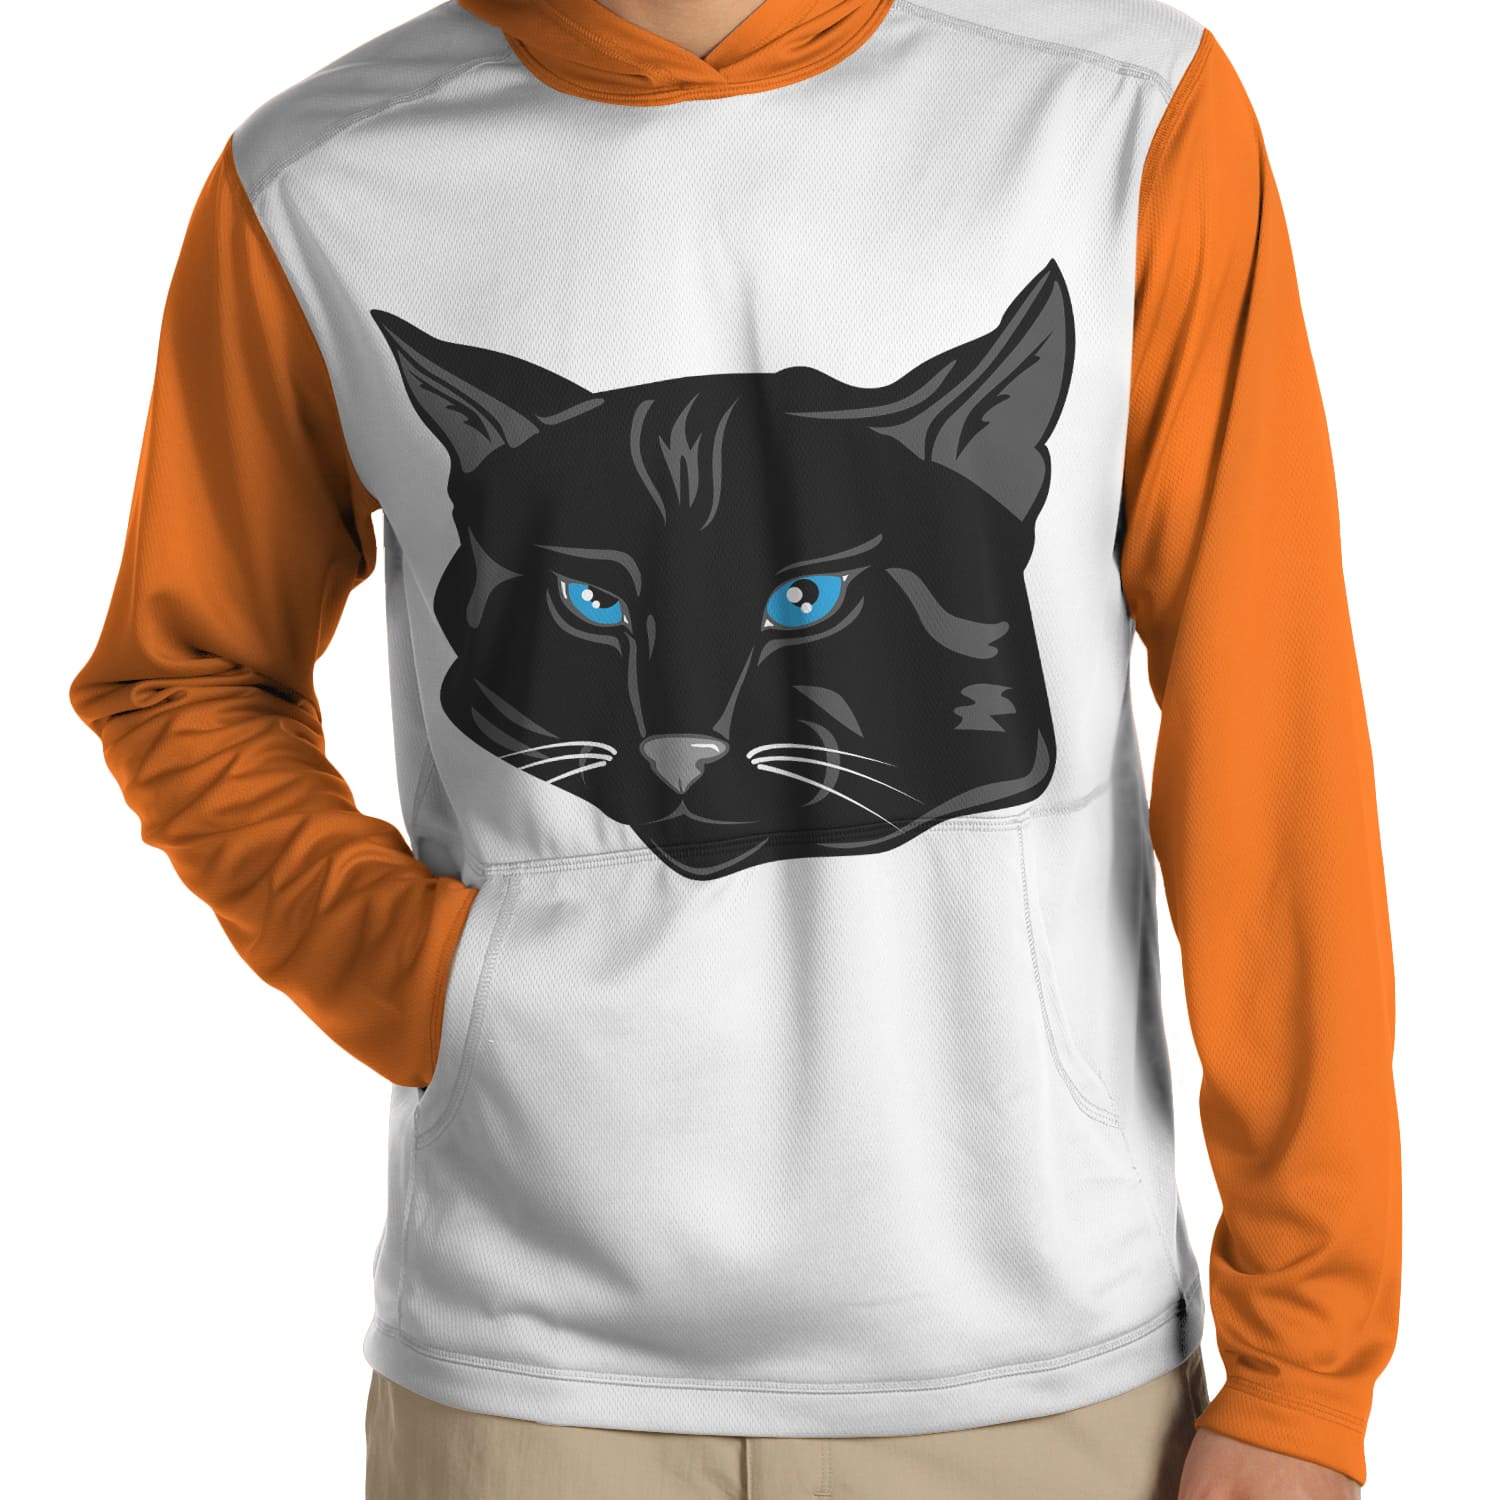 Man wearing an orange and white hoodie with a black cat on it.